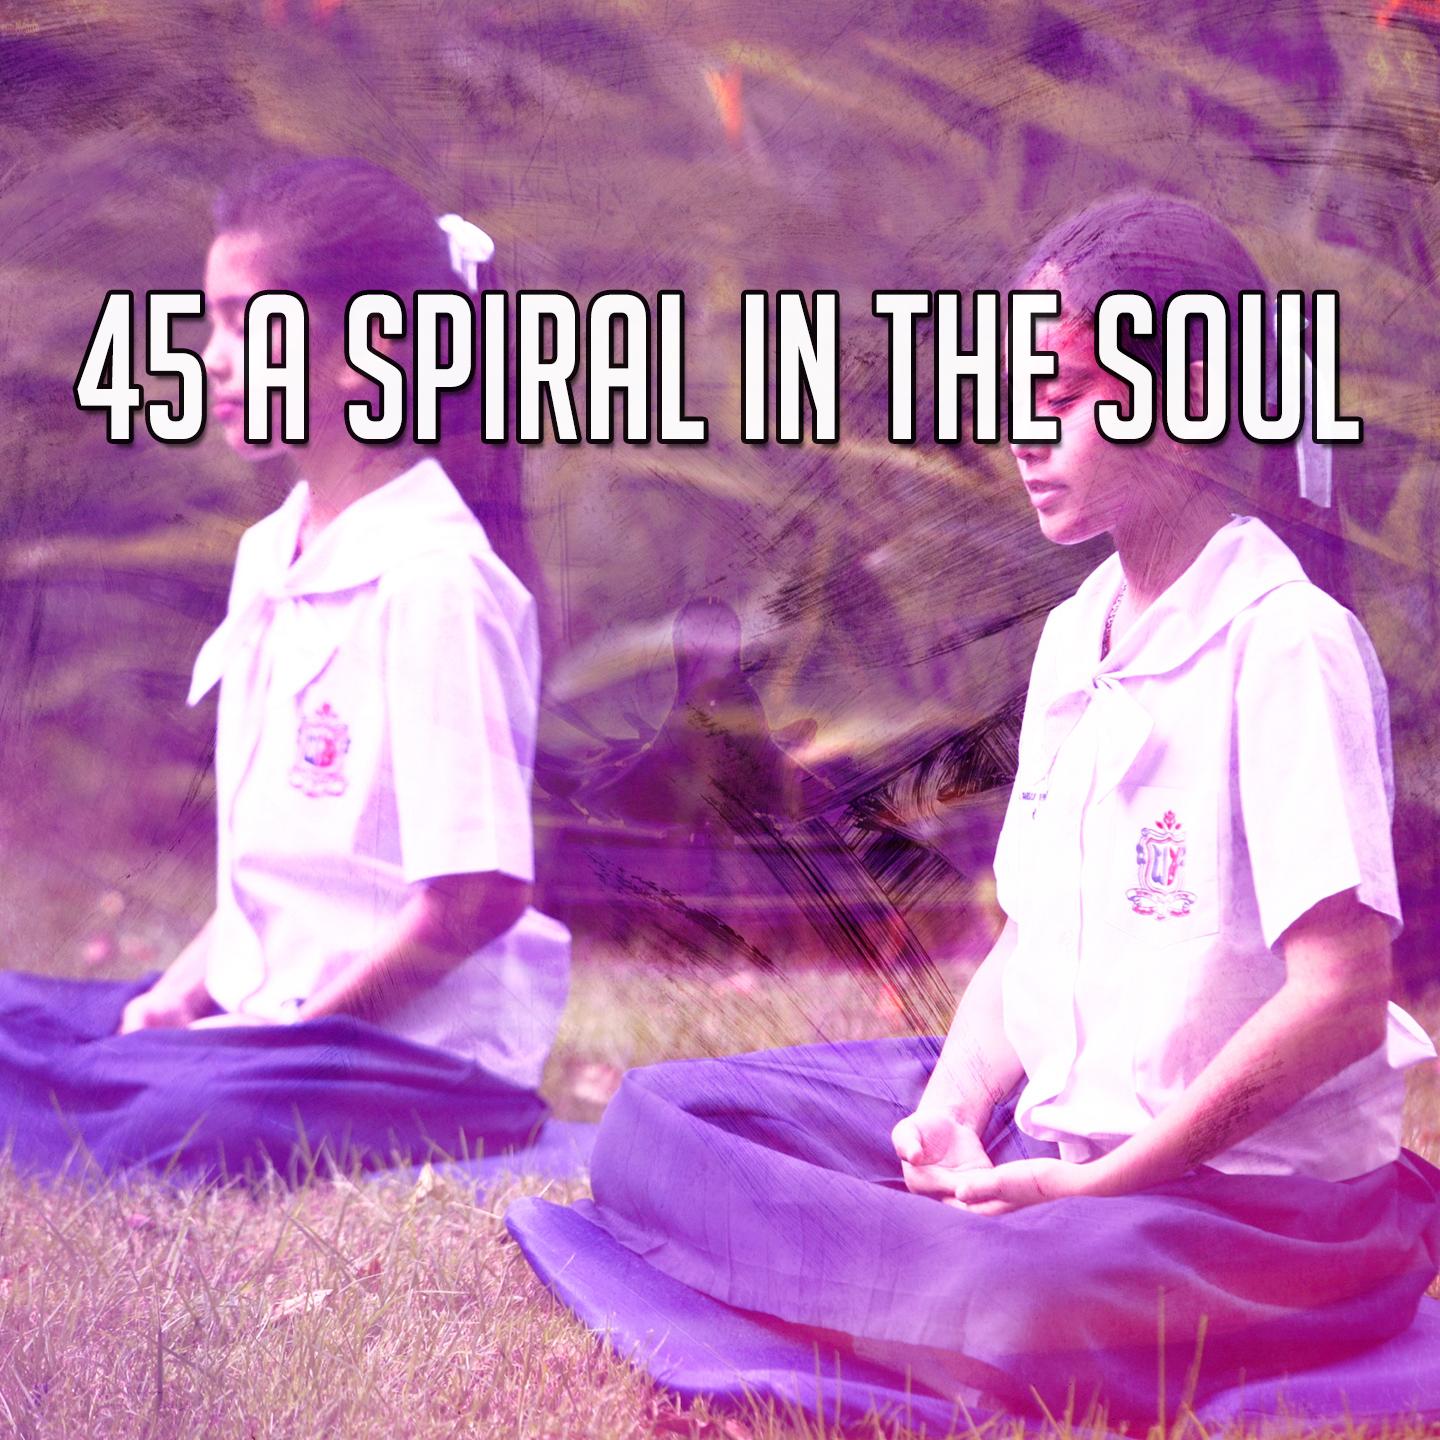 45 A Spiral in the Soul